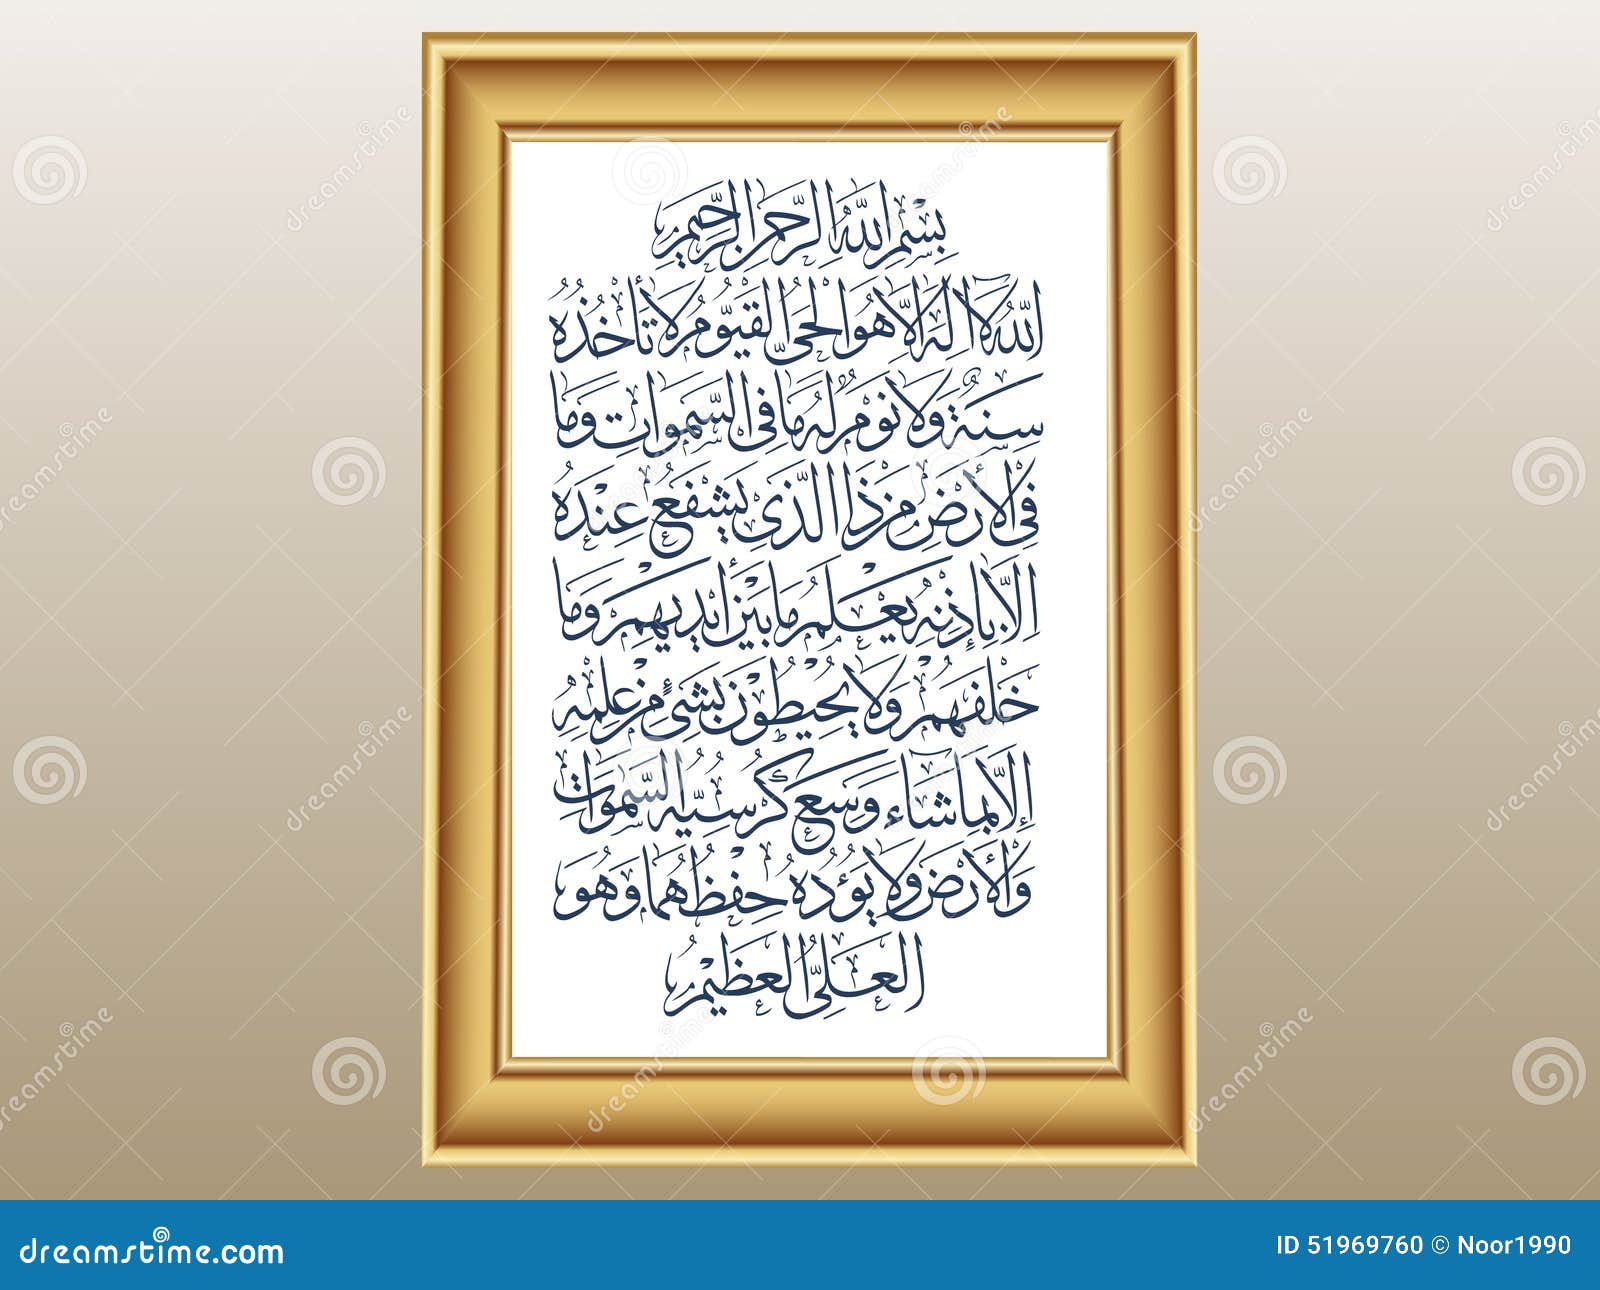 Allah There Is No God But He The Living Verse Stock Vector Illustration Of Blessed Merciful